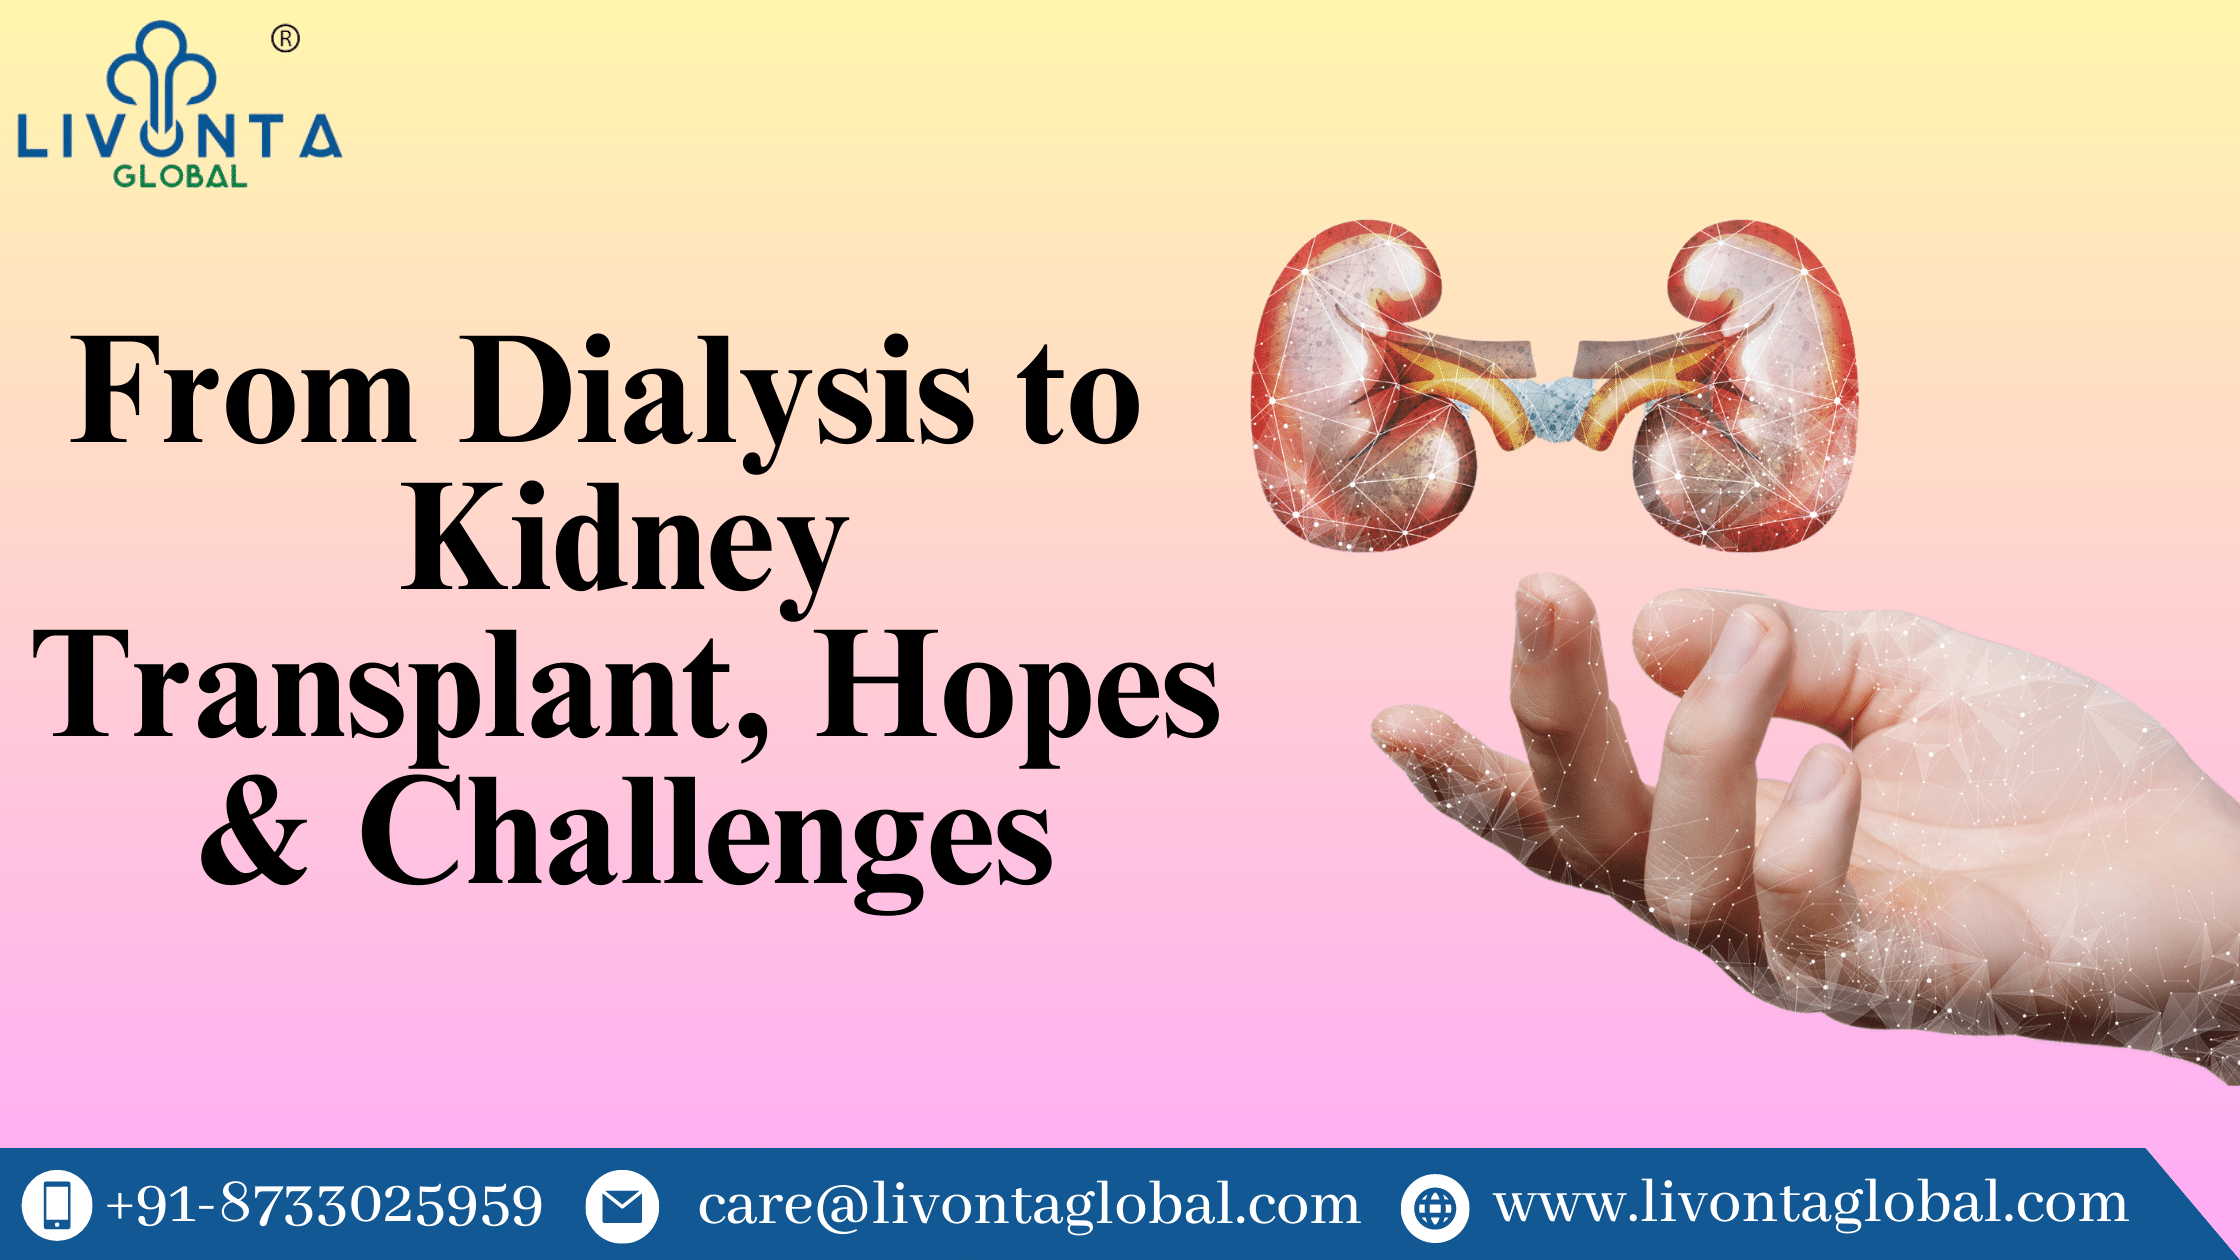 From Dialysis to Kidney Transplant, Hopes & Challenges